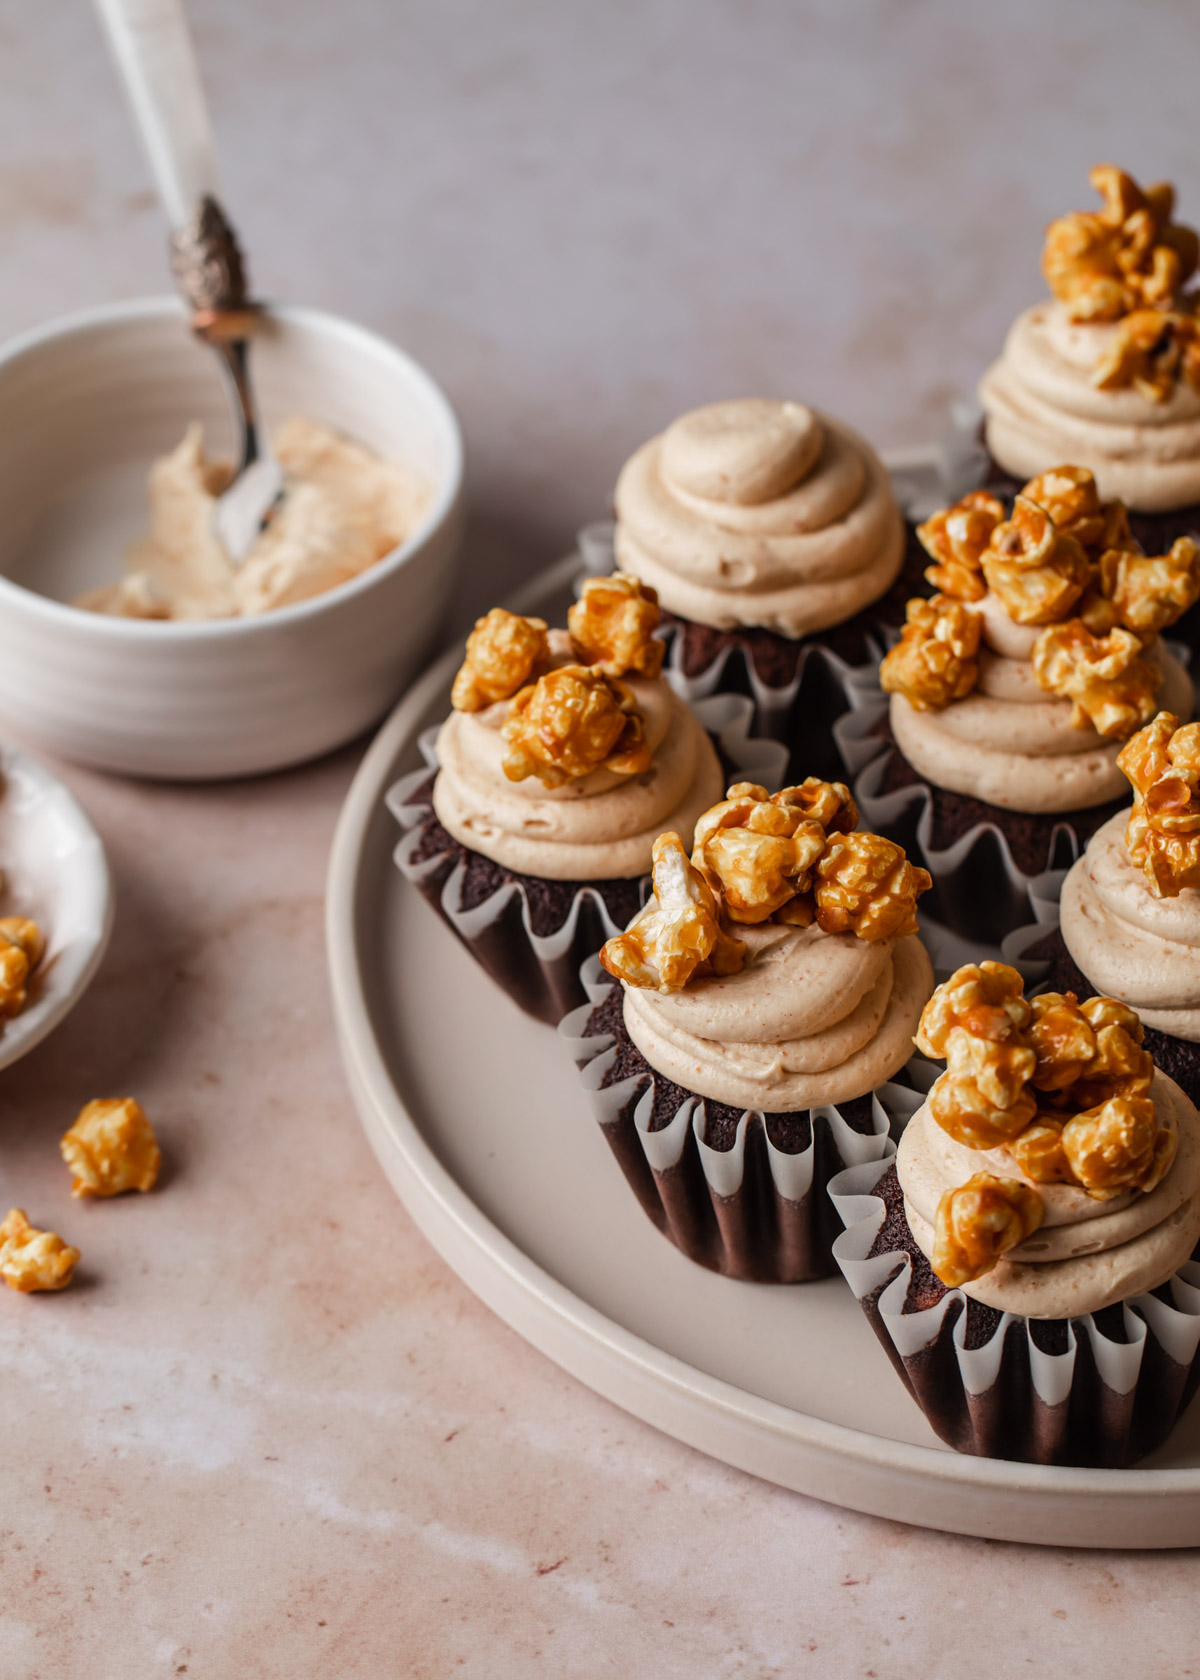 A platter of chocolate peanut butter cupcakes with caramel corn on top.